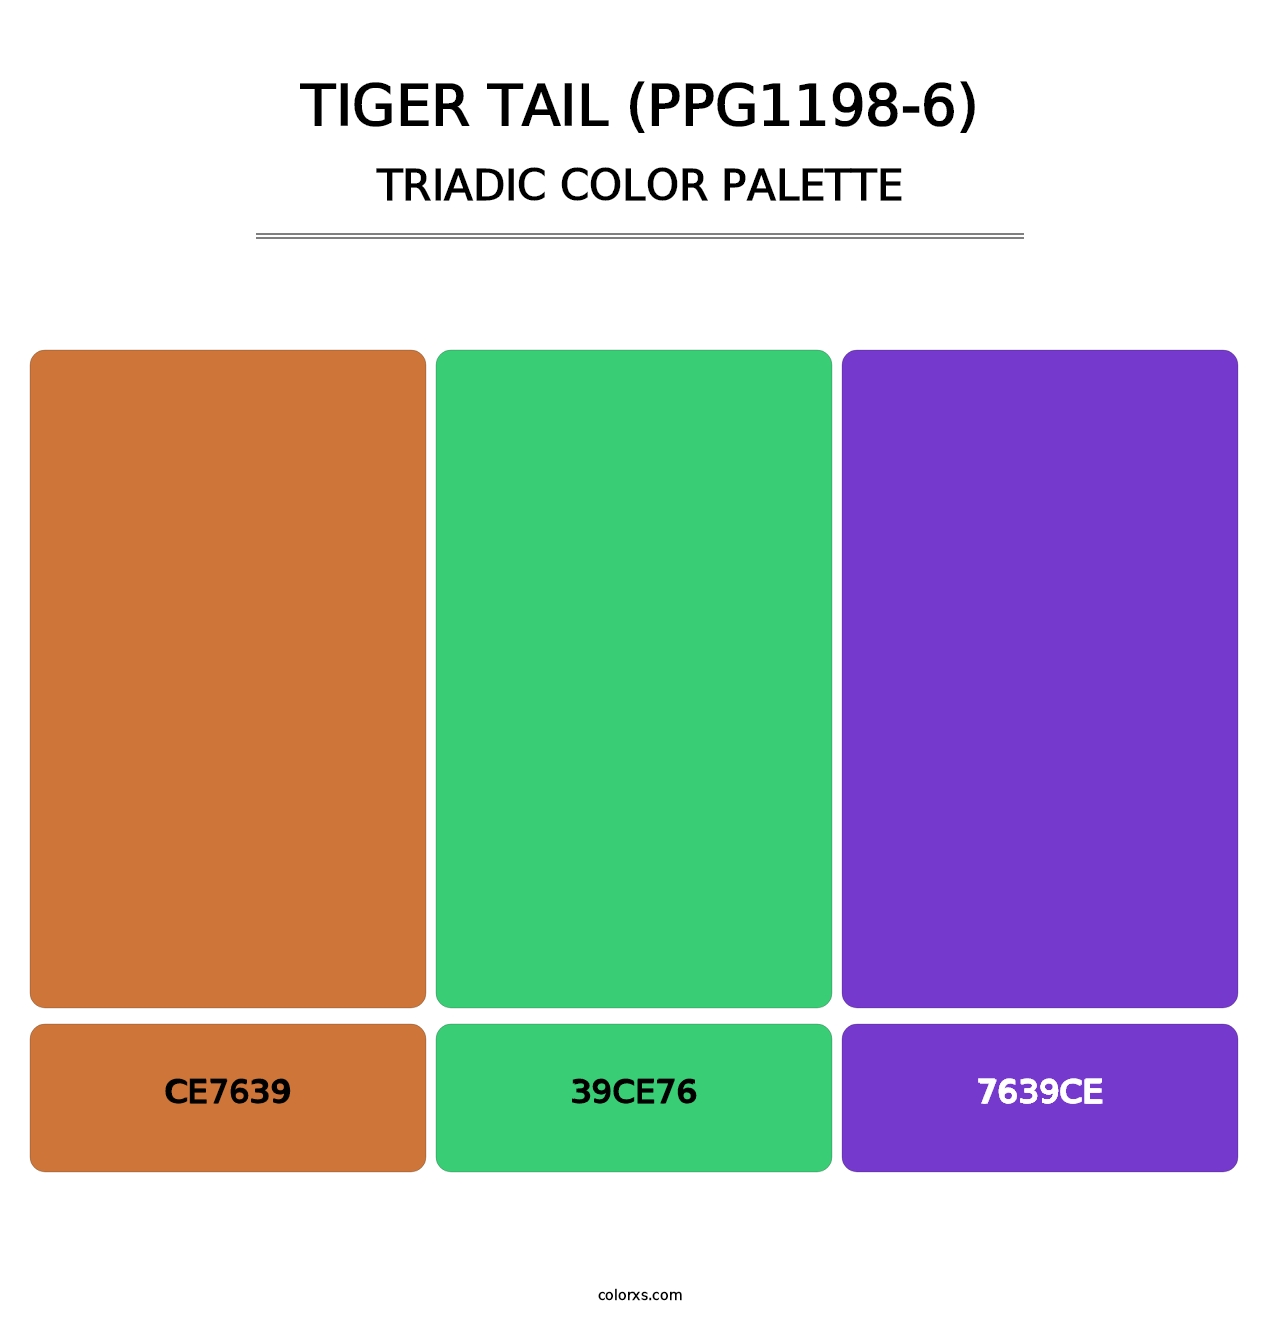 Tiger Tail (PPG1198-6) - Triadic Color Palette